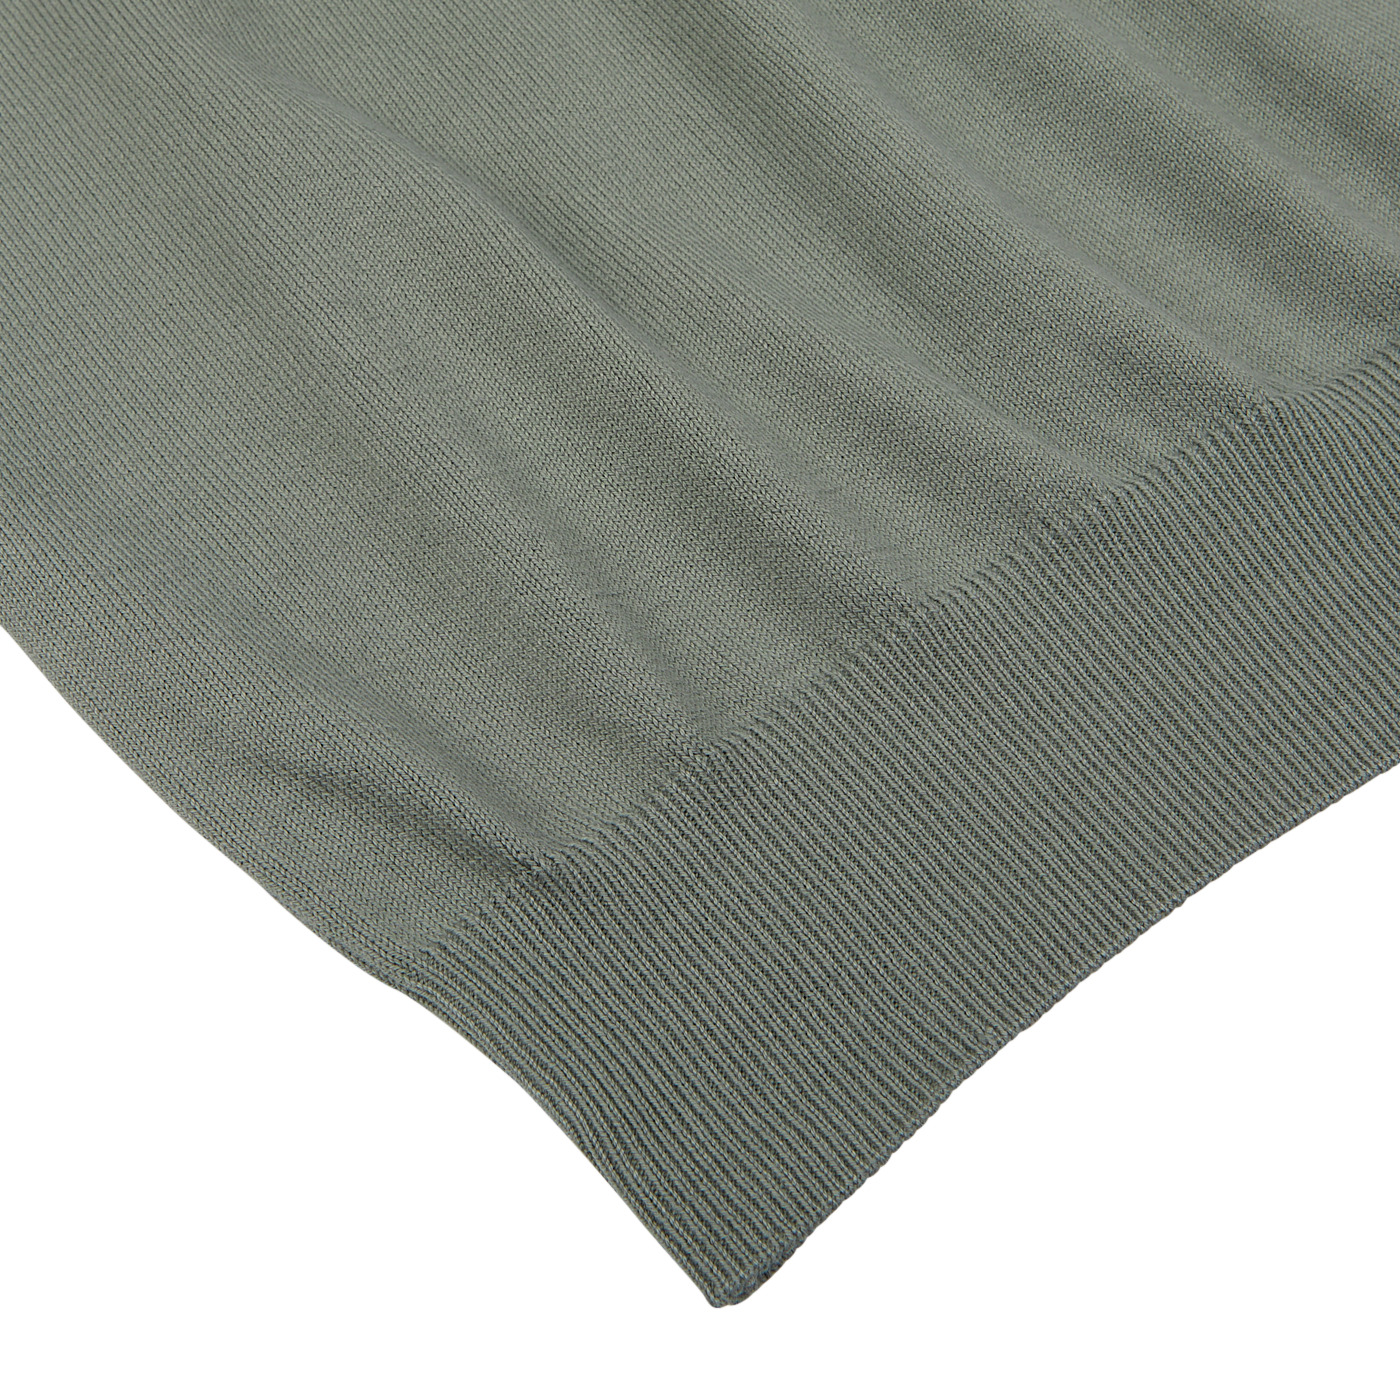 Khaki green knitted fabric with ribbed texture on a white background. could be replaced with: Mauro Ottaviani's Khaki Green Supima Cotton Polo Shirt crafted in a knitted fabric with ribbed texture on a white background.